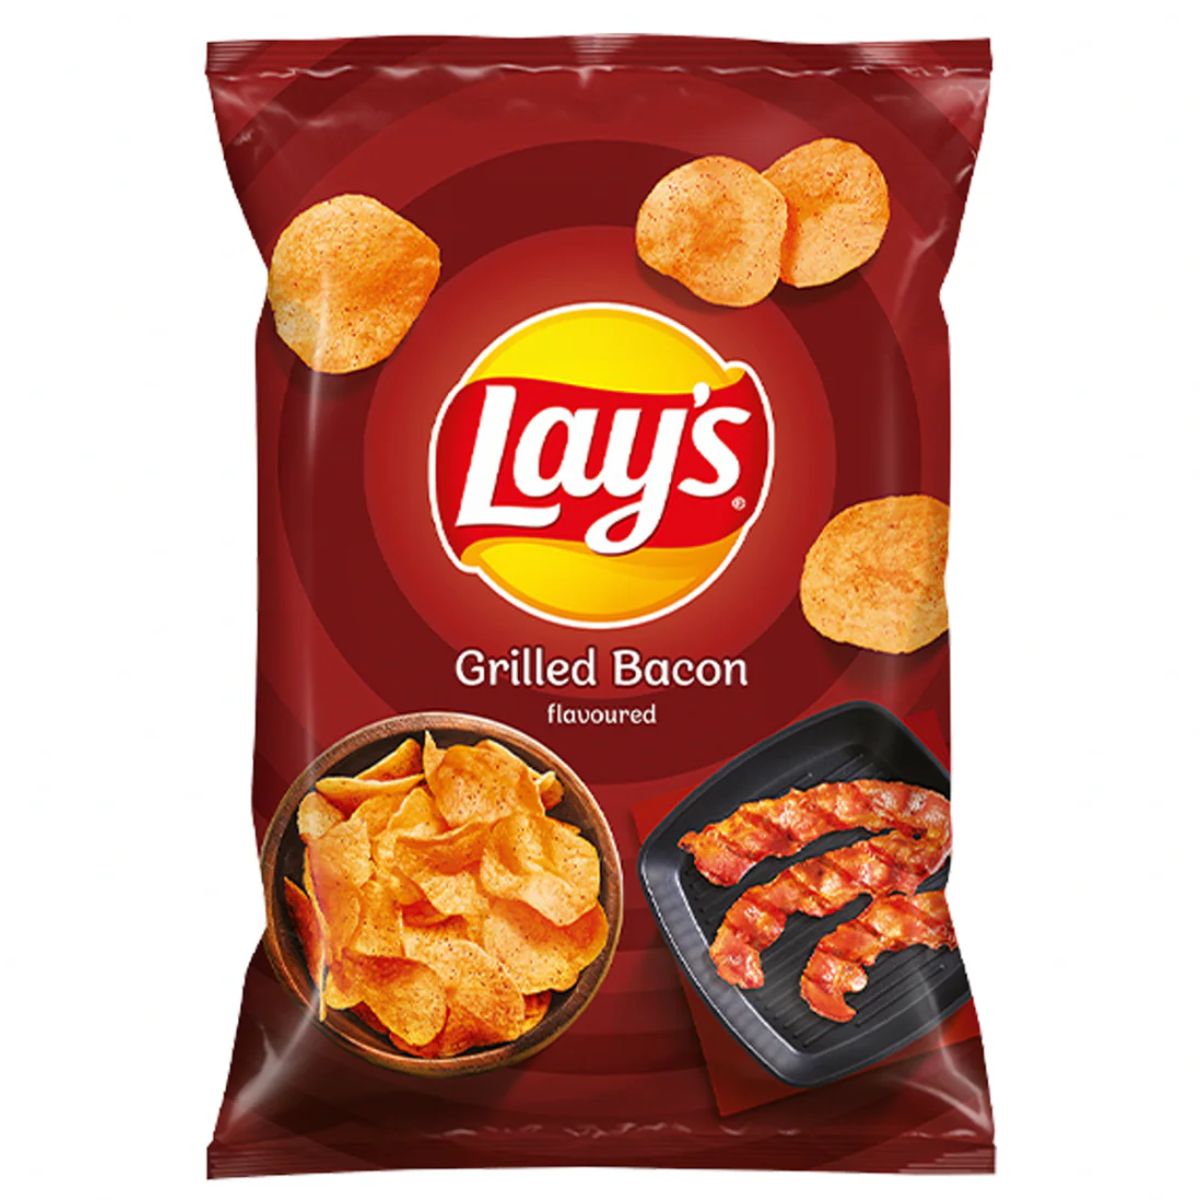 Lays - Grilled Bacon Crisps - 130g on a white background.